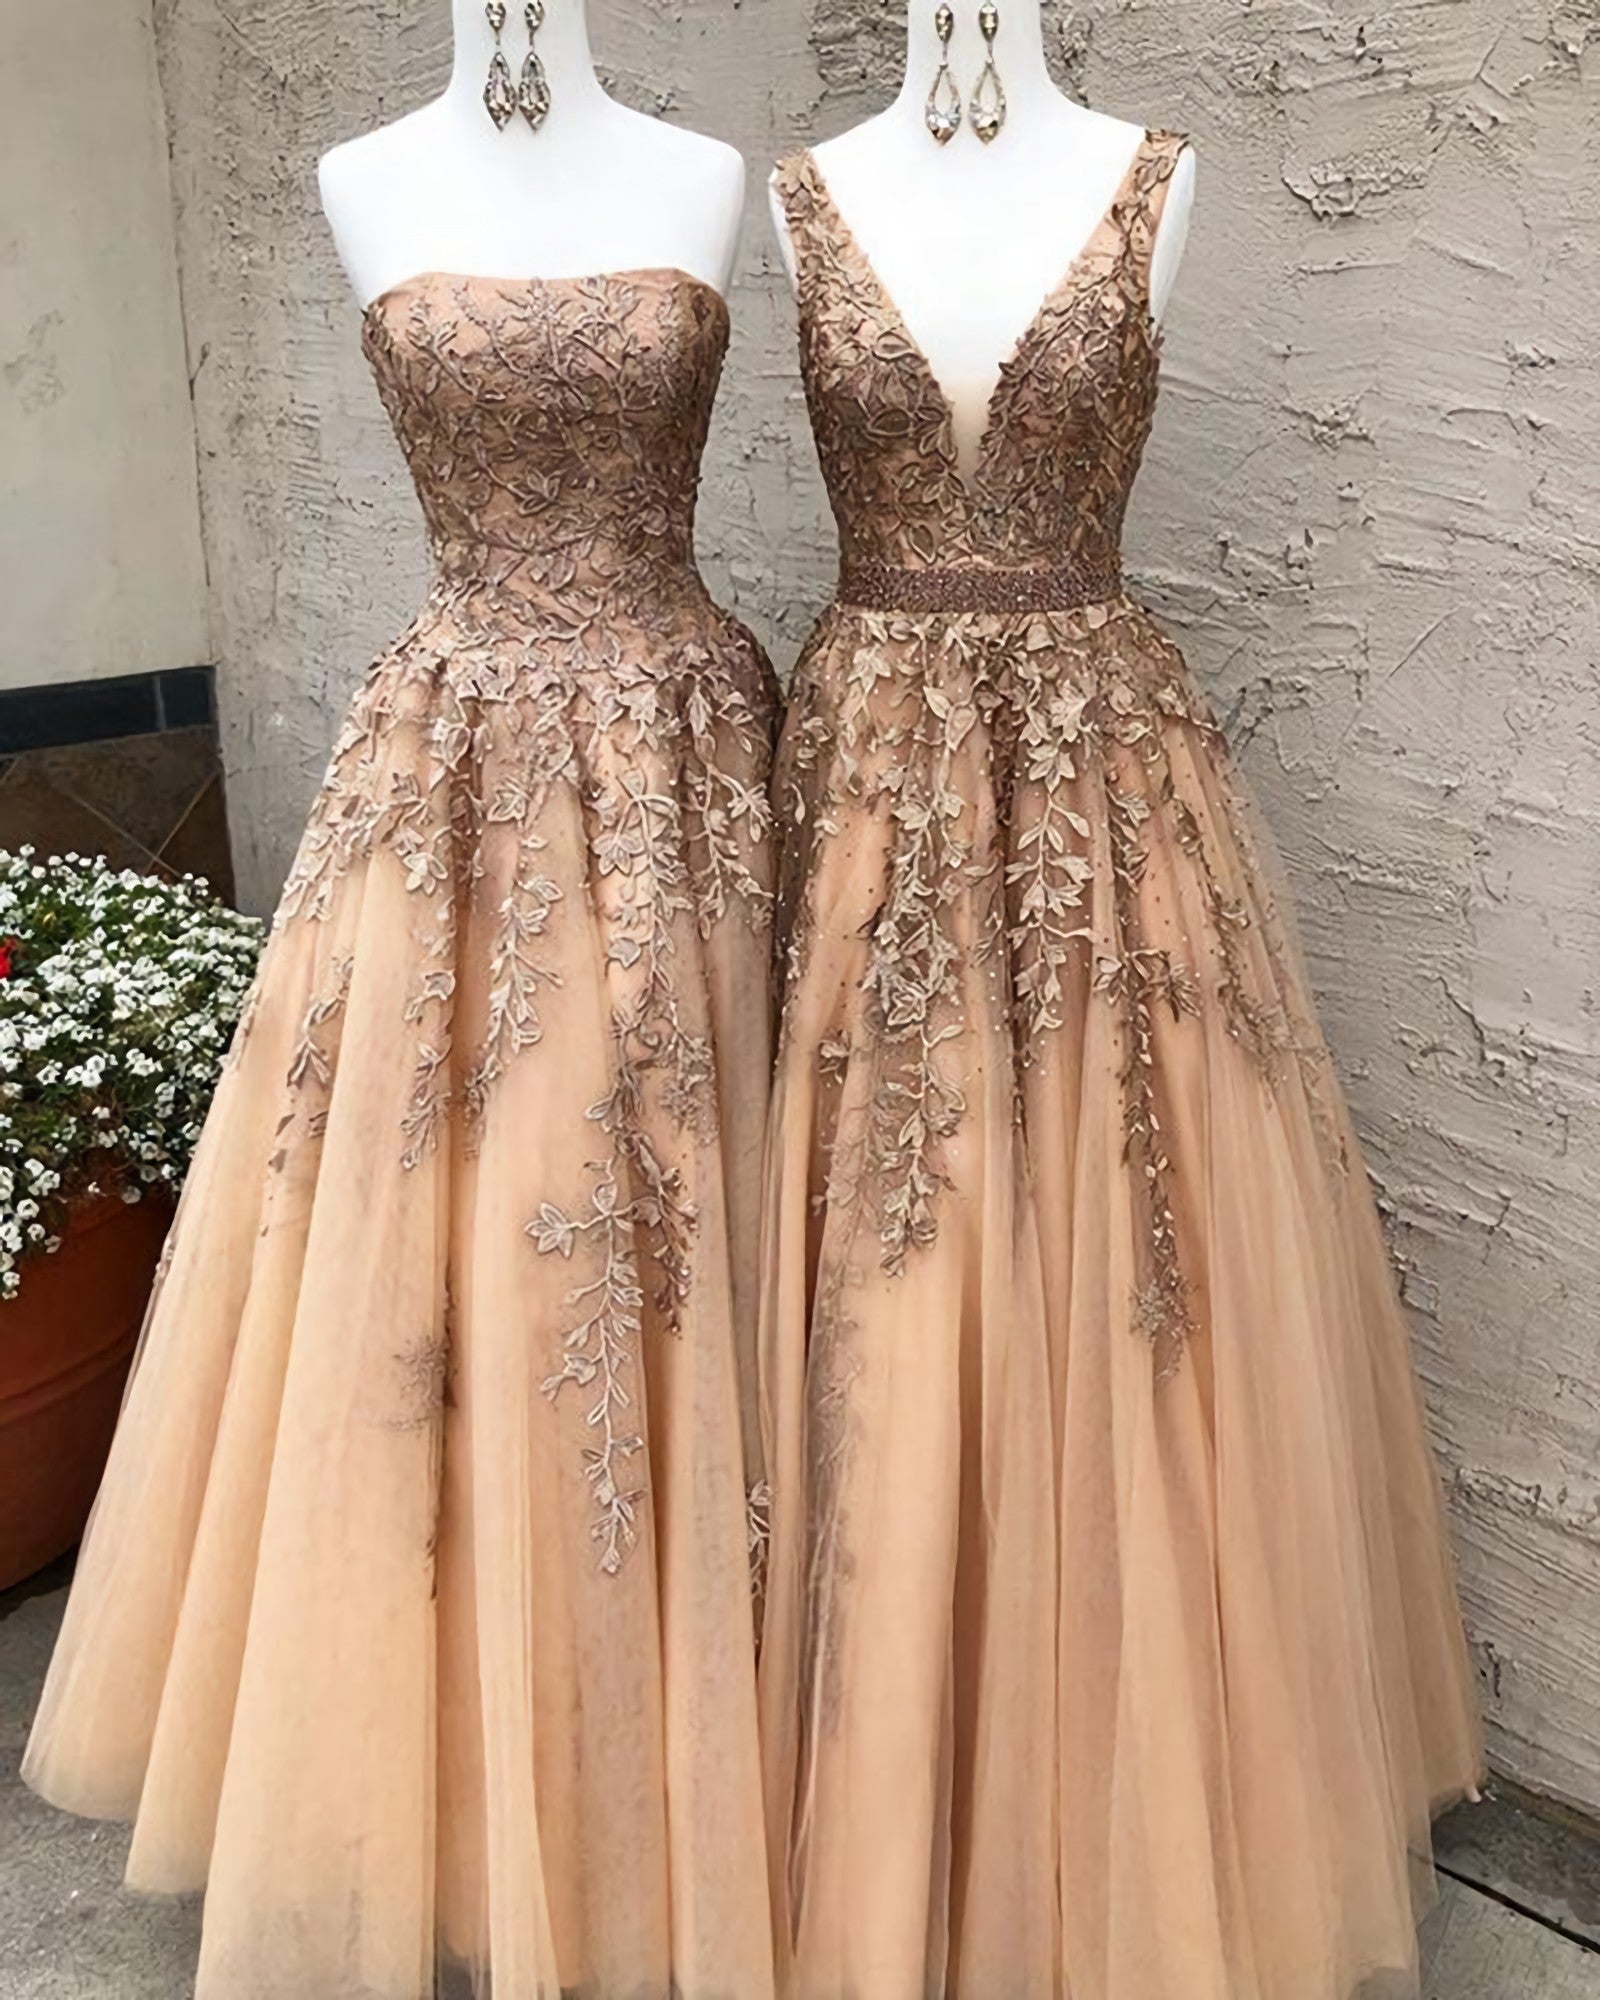 Long Champagne Prom Dress, Sexy V Neck Strapless A Line Appliques Formal Party Dresses